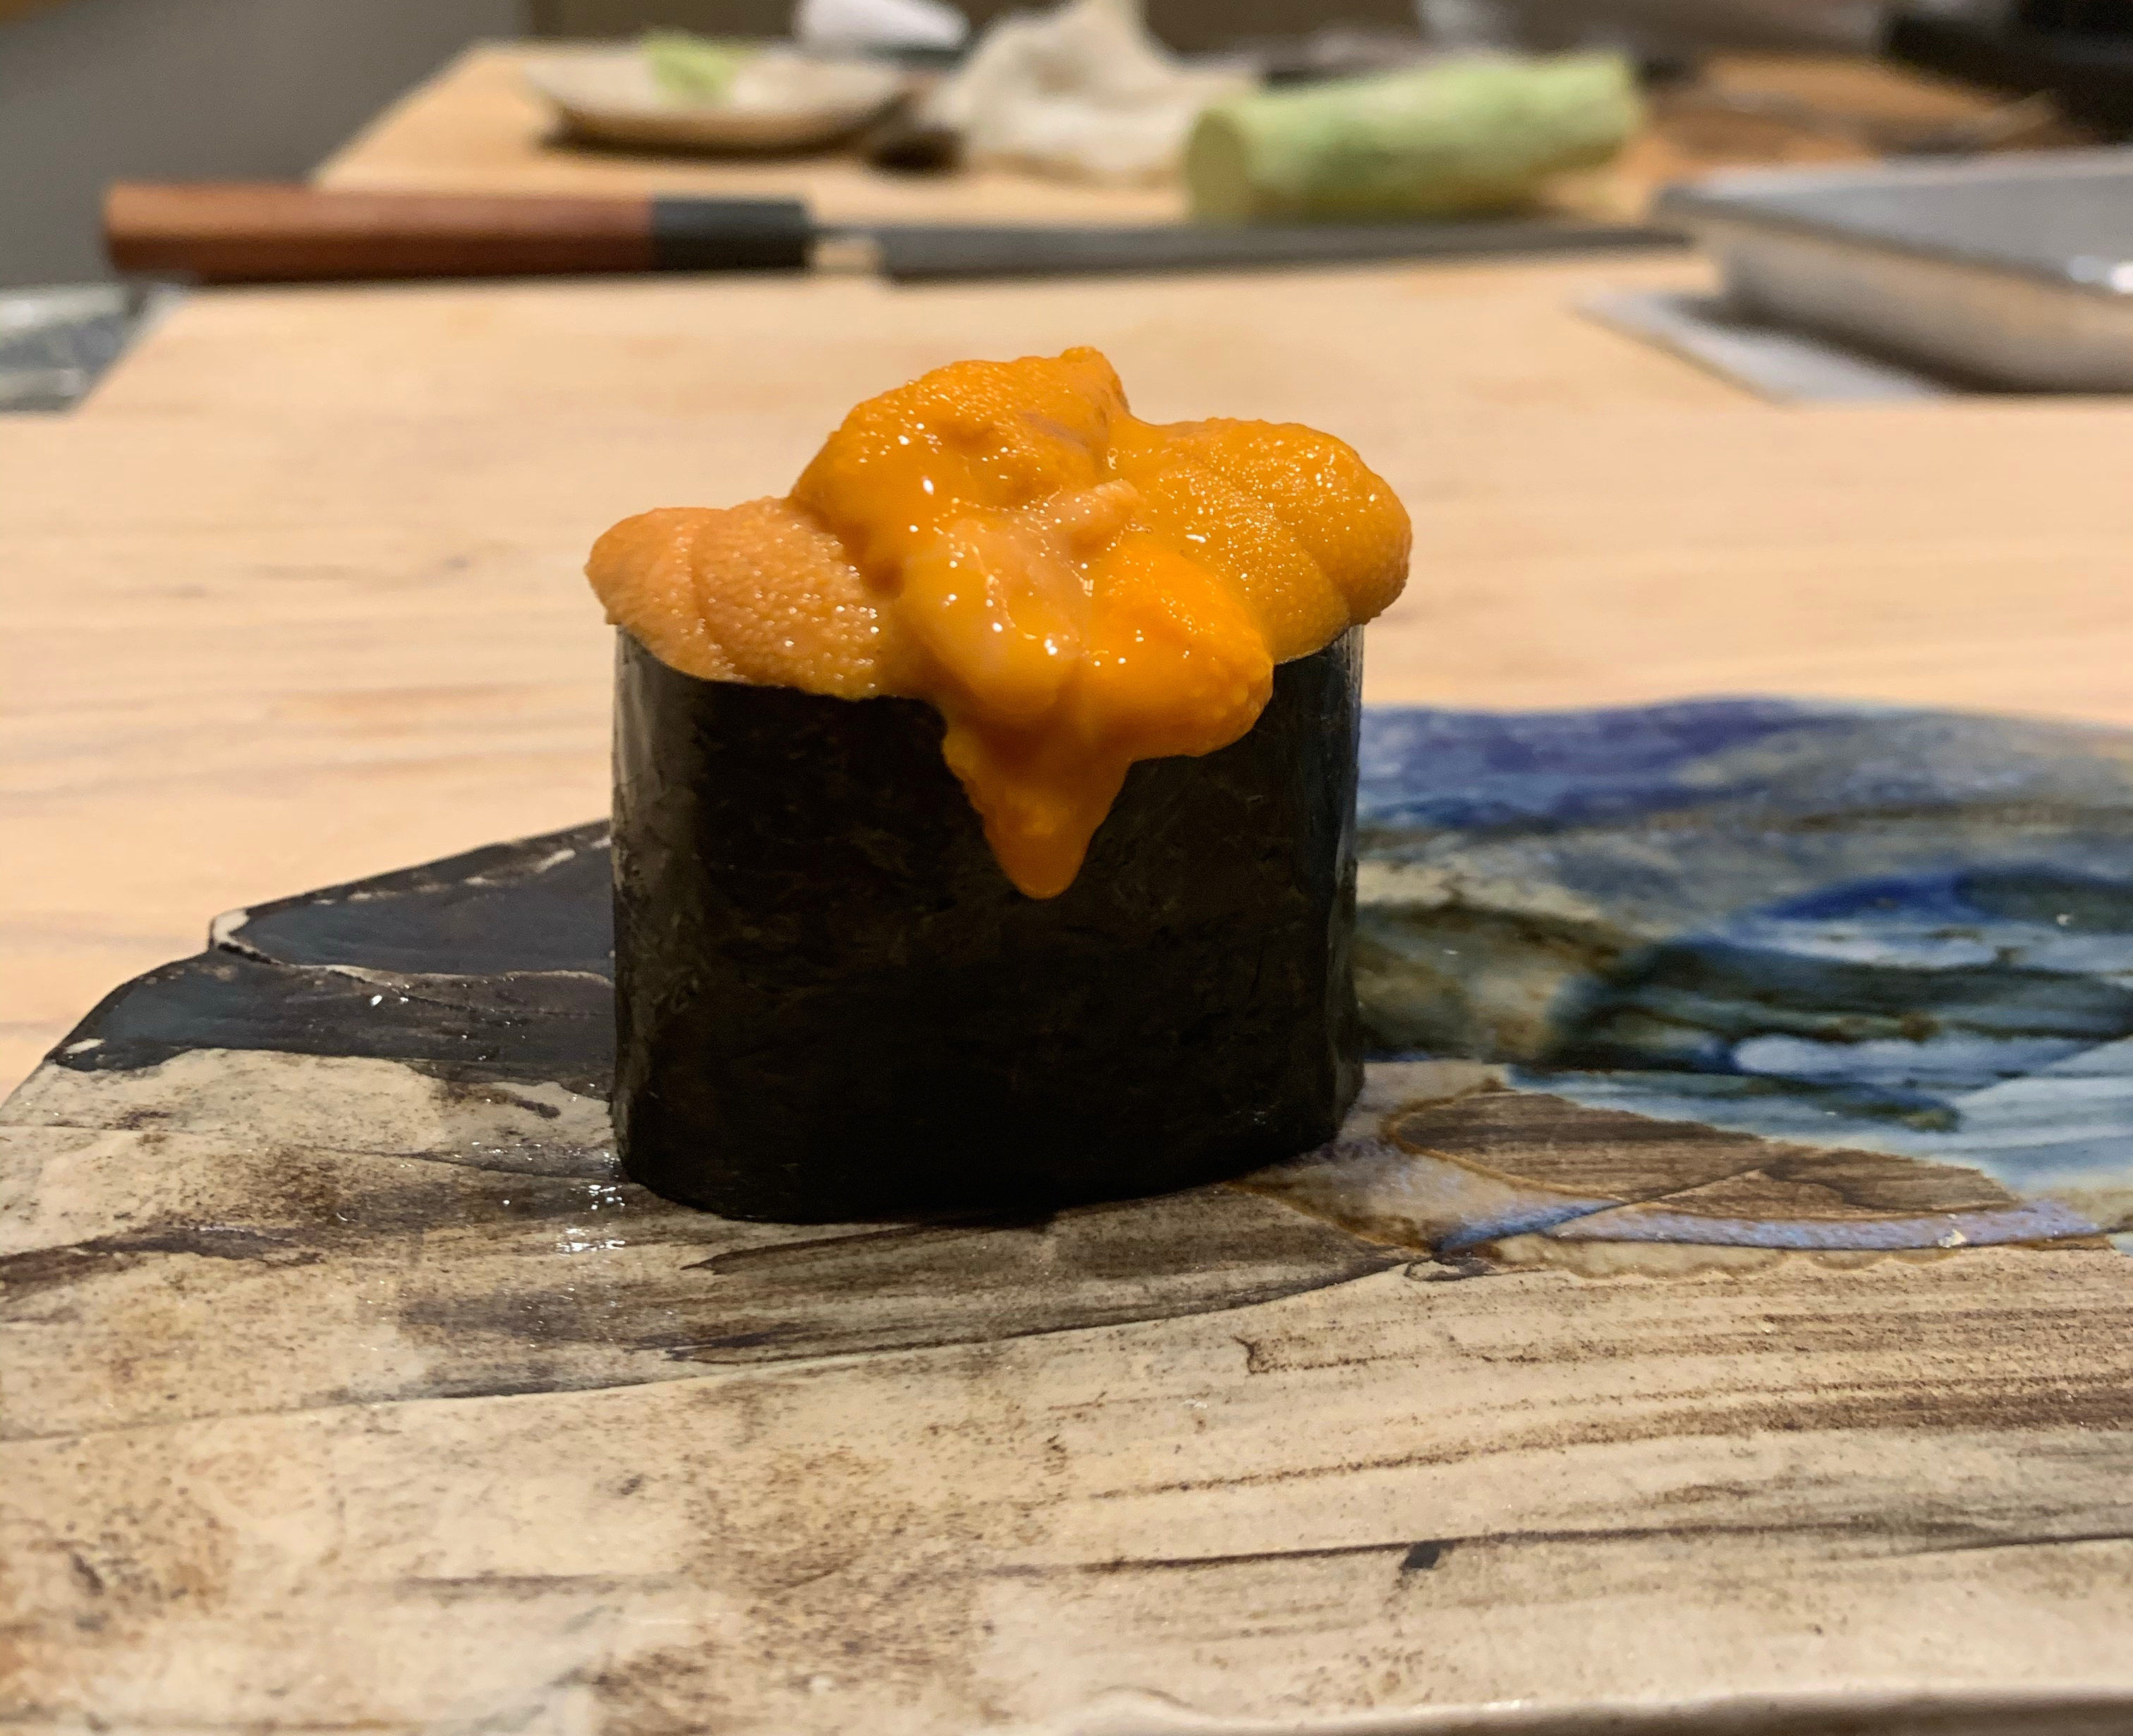 One piece of sushi with orange sea urchin sticking out of the top. There is an orange sauce dripping down the side of the nori. The rice is obscured by the tall nori and the uni.